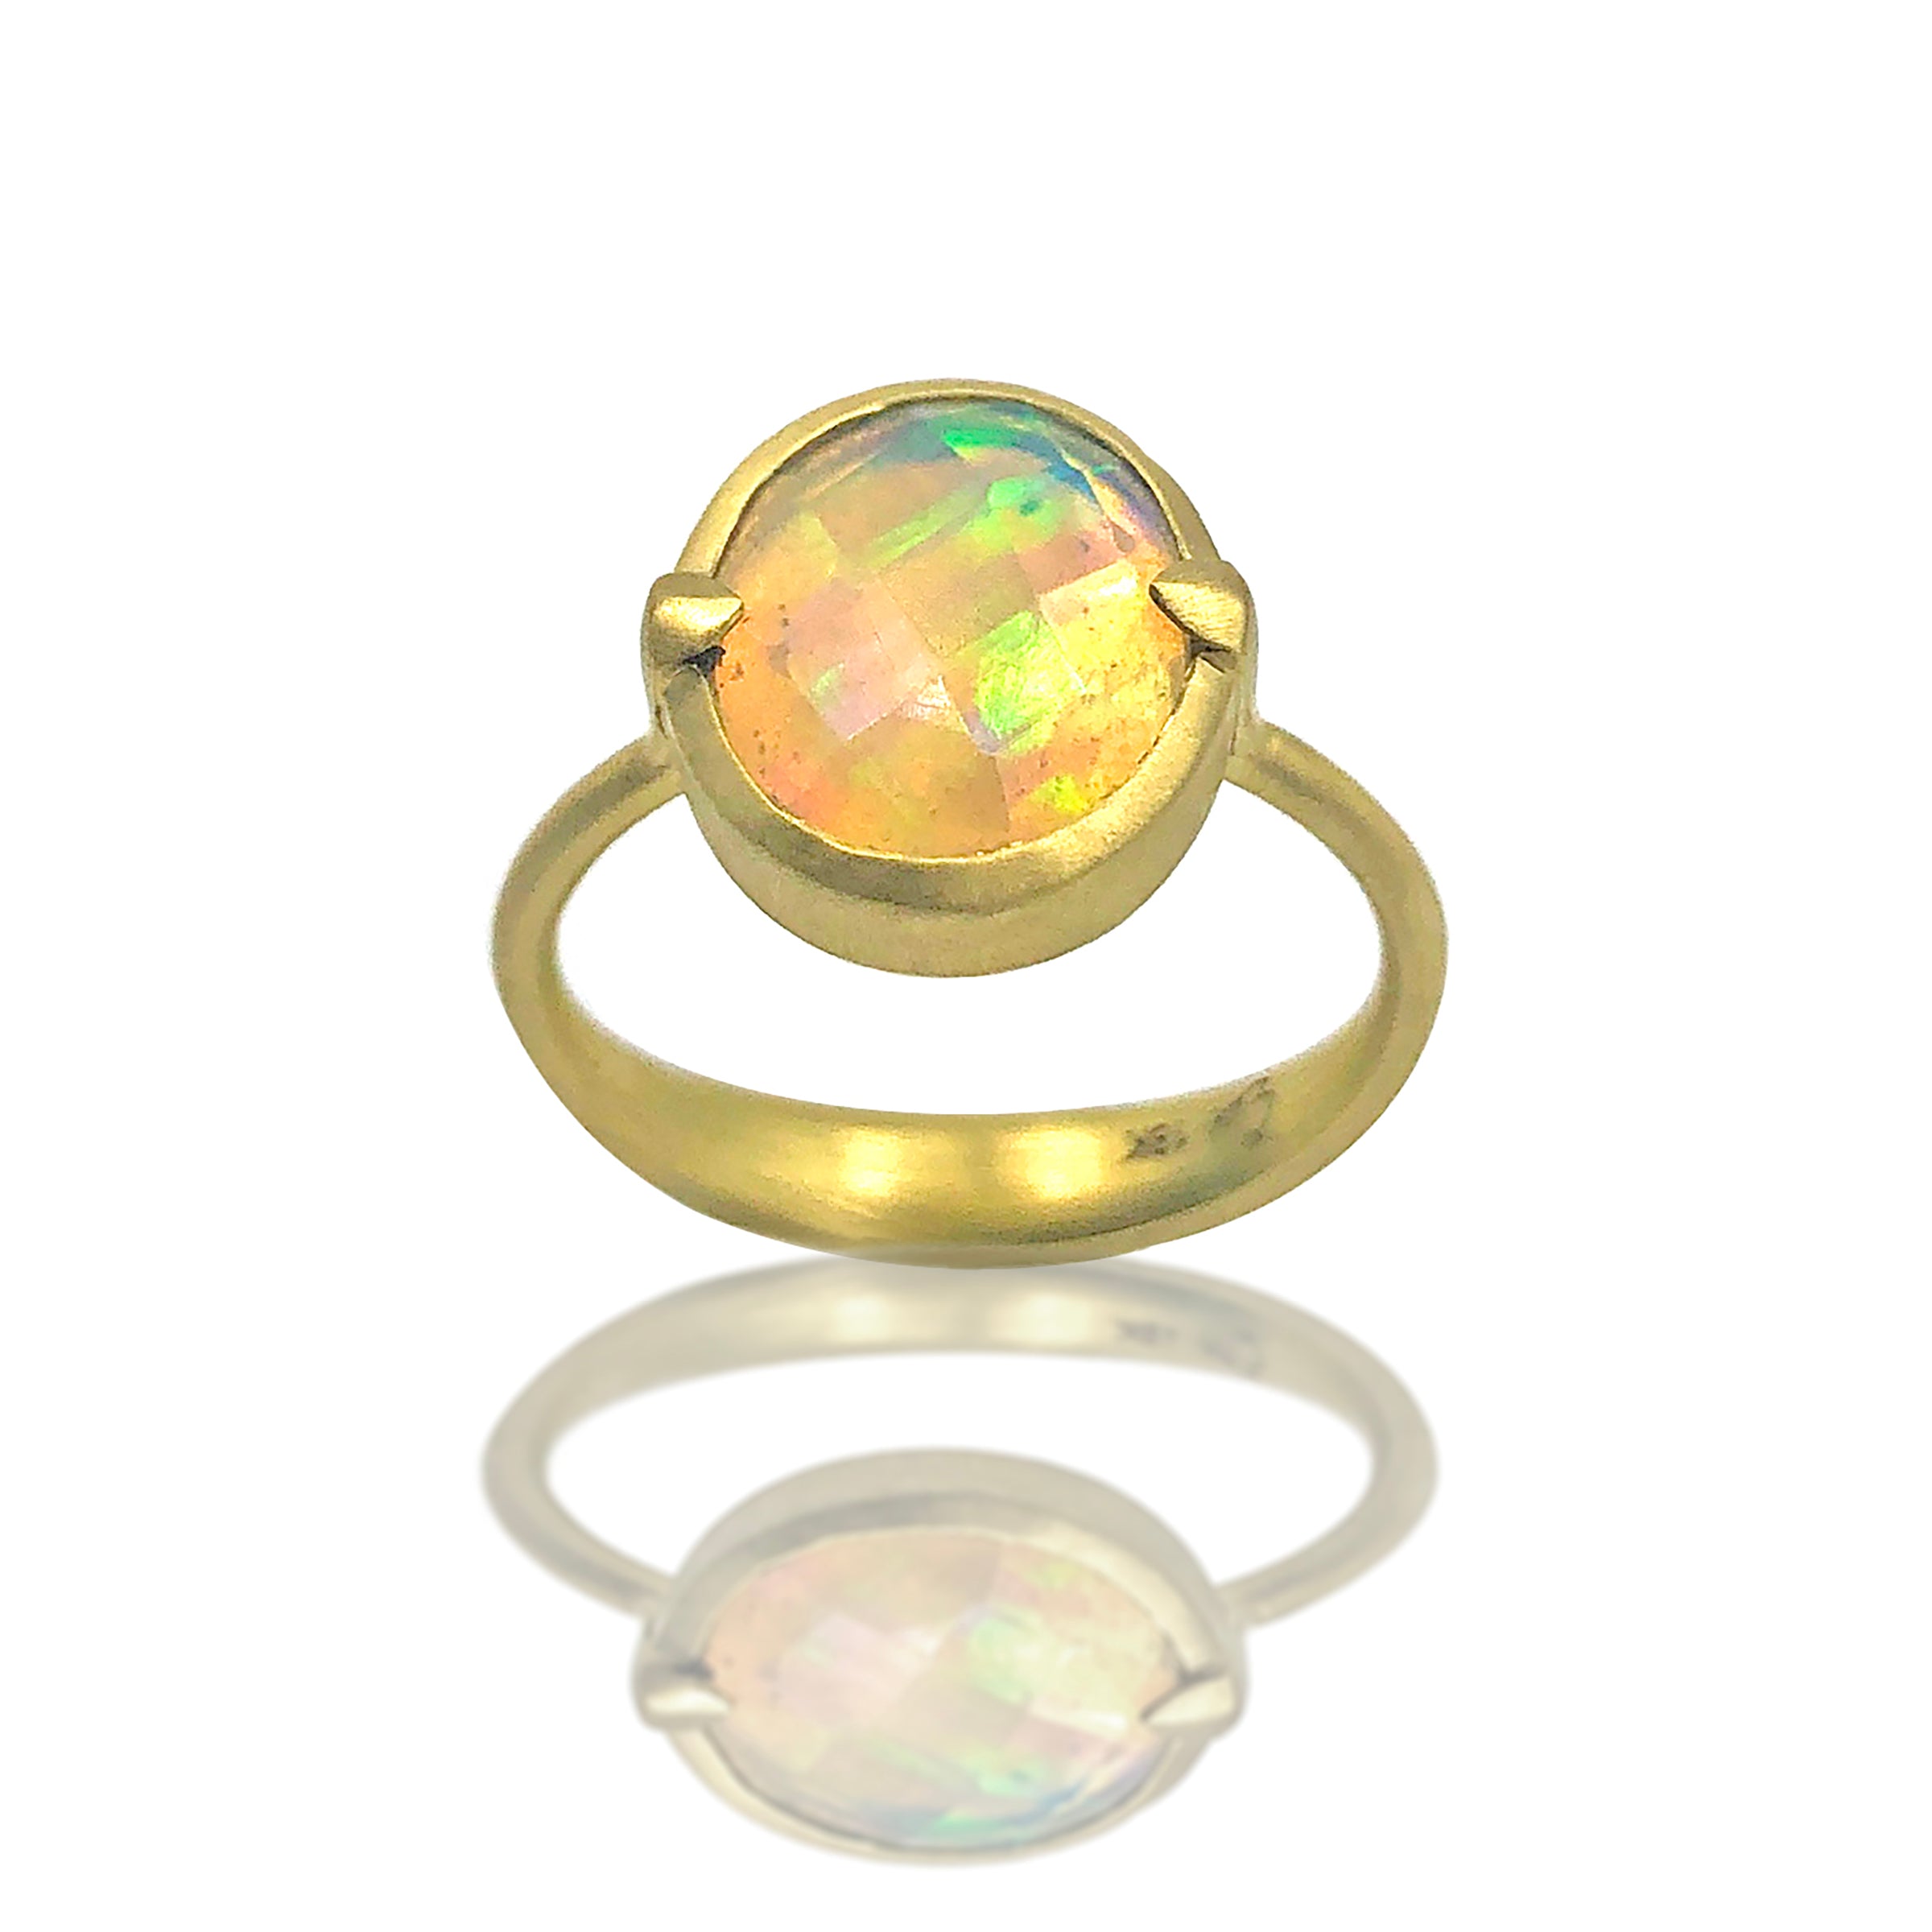 Faceted Ethiopian Opal Amazon Ring